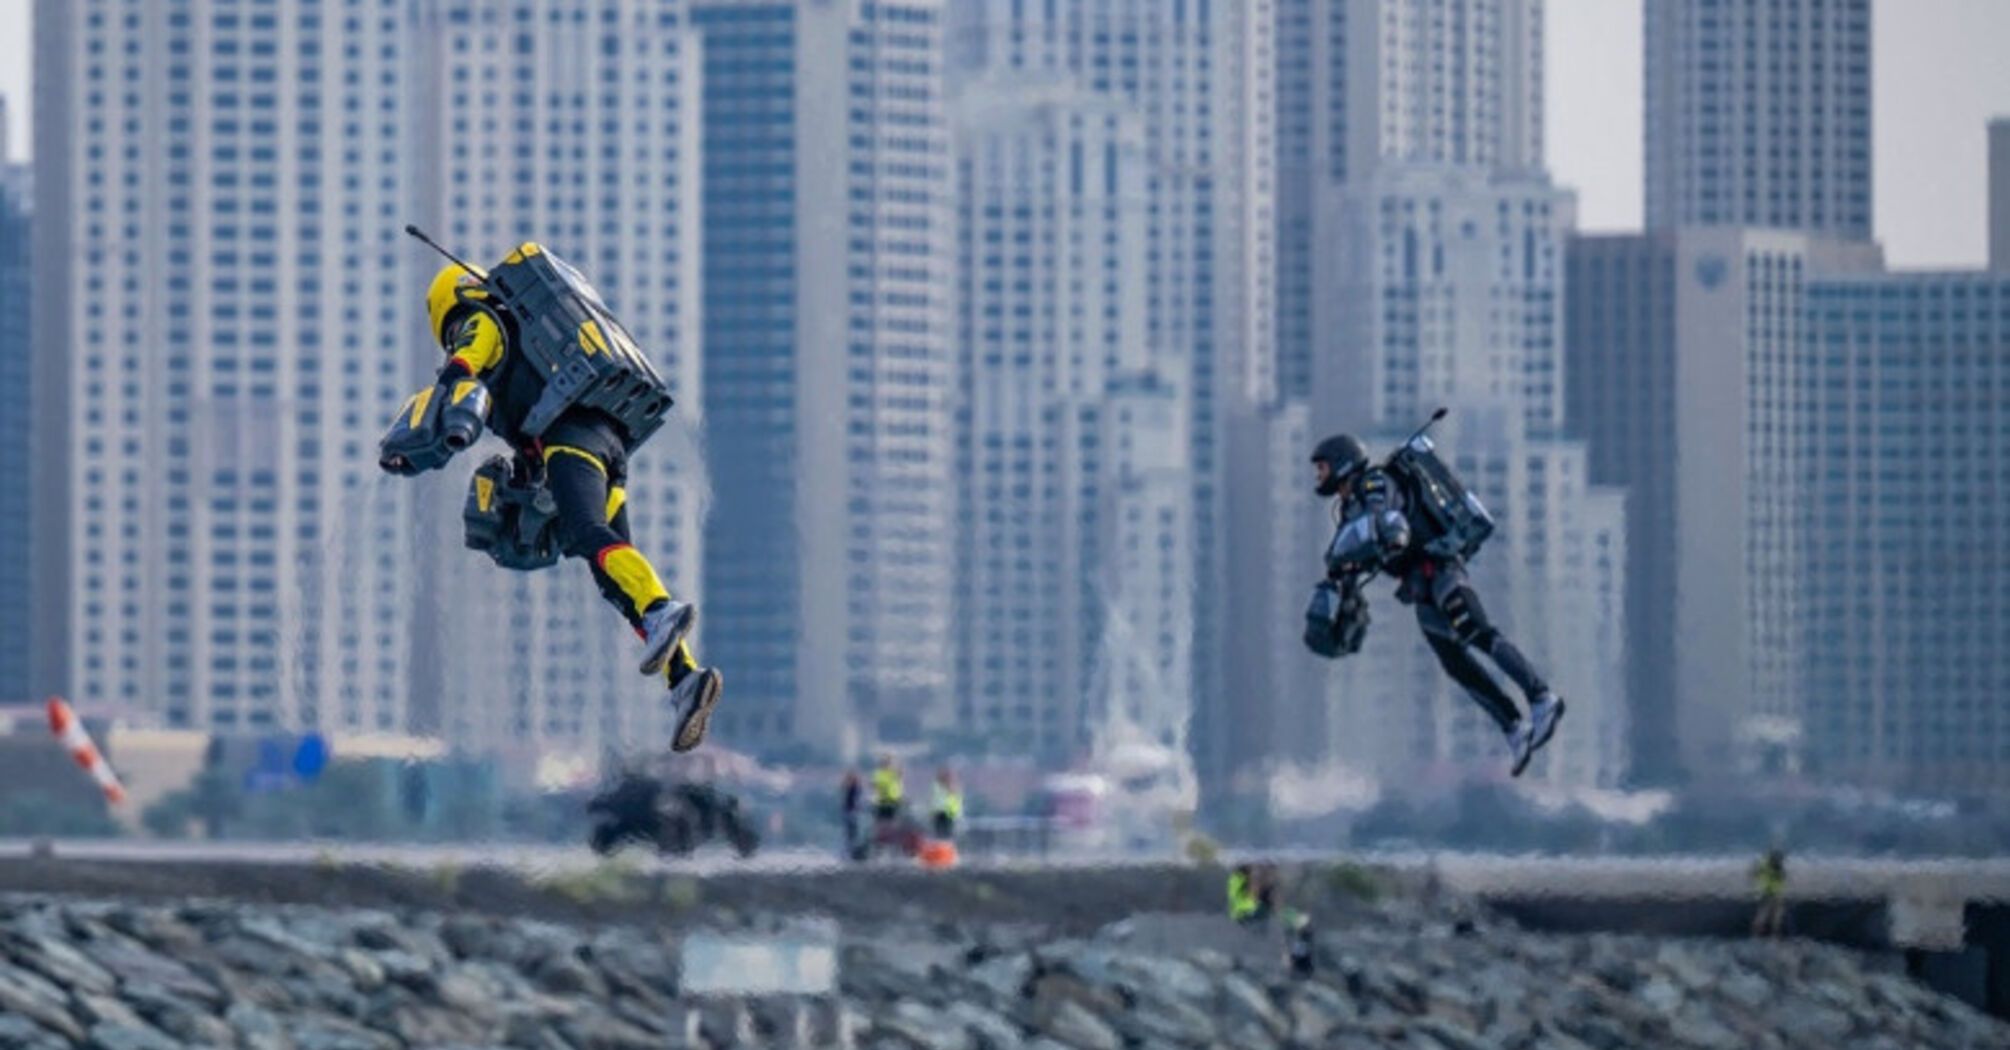 The world's first jet suit race took place in Dubai